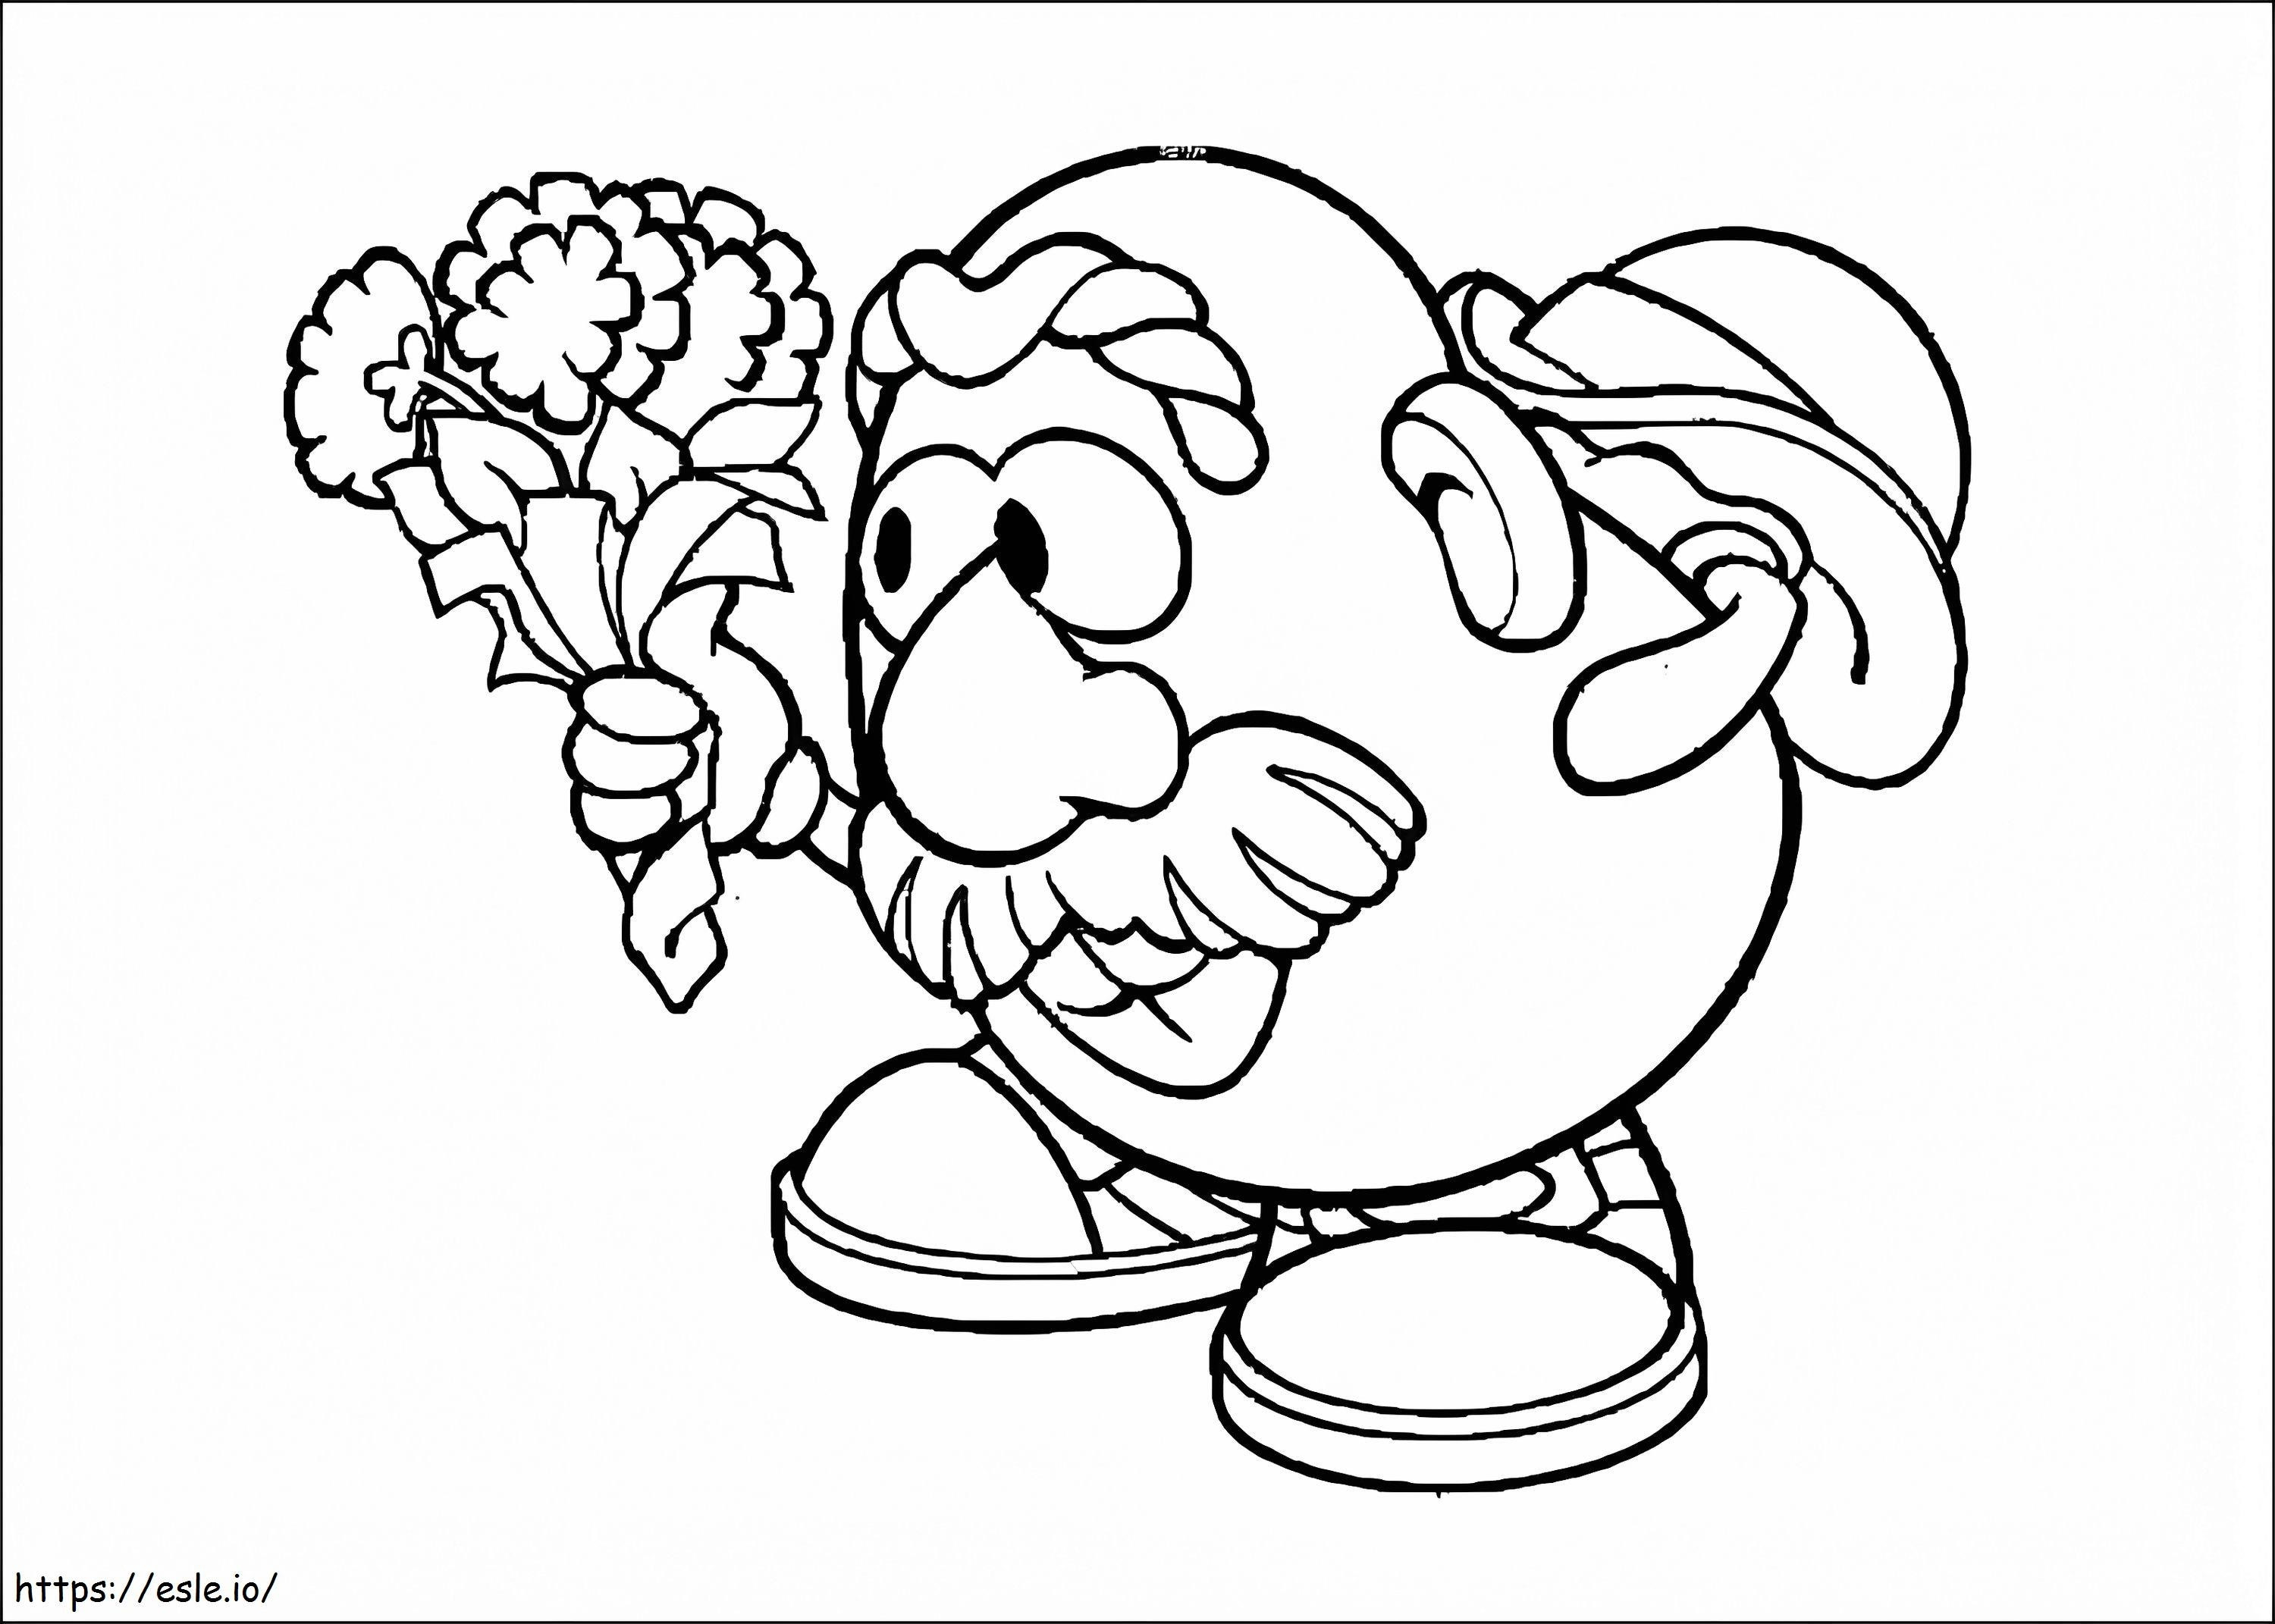 Mr. Potato Head With Flowers coloring page